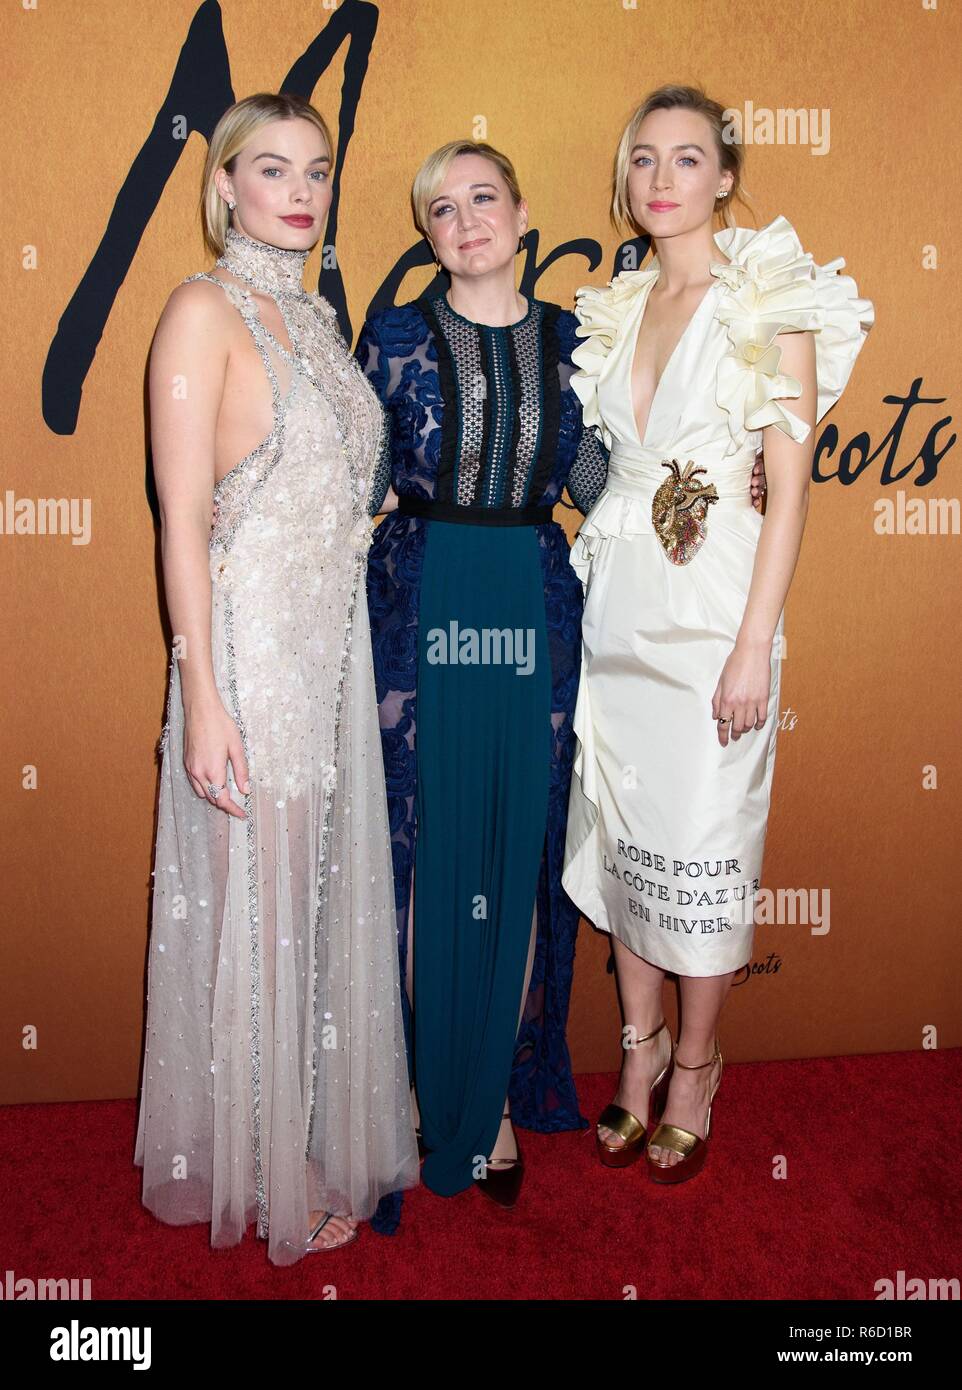 New York, NY, USA. 4th Dec, 2018. Margot Robbie, Josie Rourke, Saoirse Ronan at arrivals for MARY QUEEN OF SCOTS Premiere, The Paris Theater, New York, NY December 4, 2018. Credit: RCF/Everett Collection/Alamy Live News Stock Photo